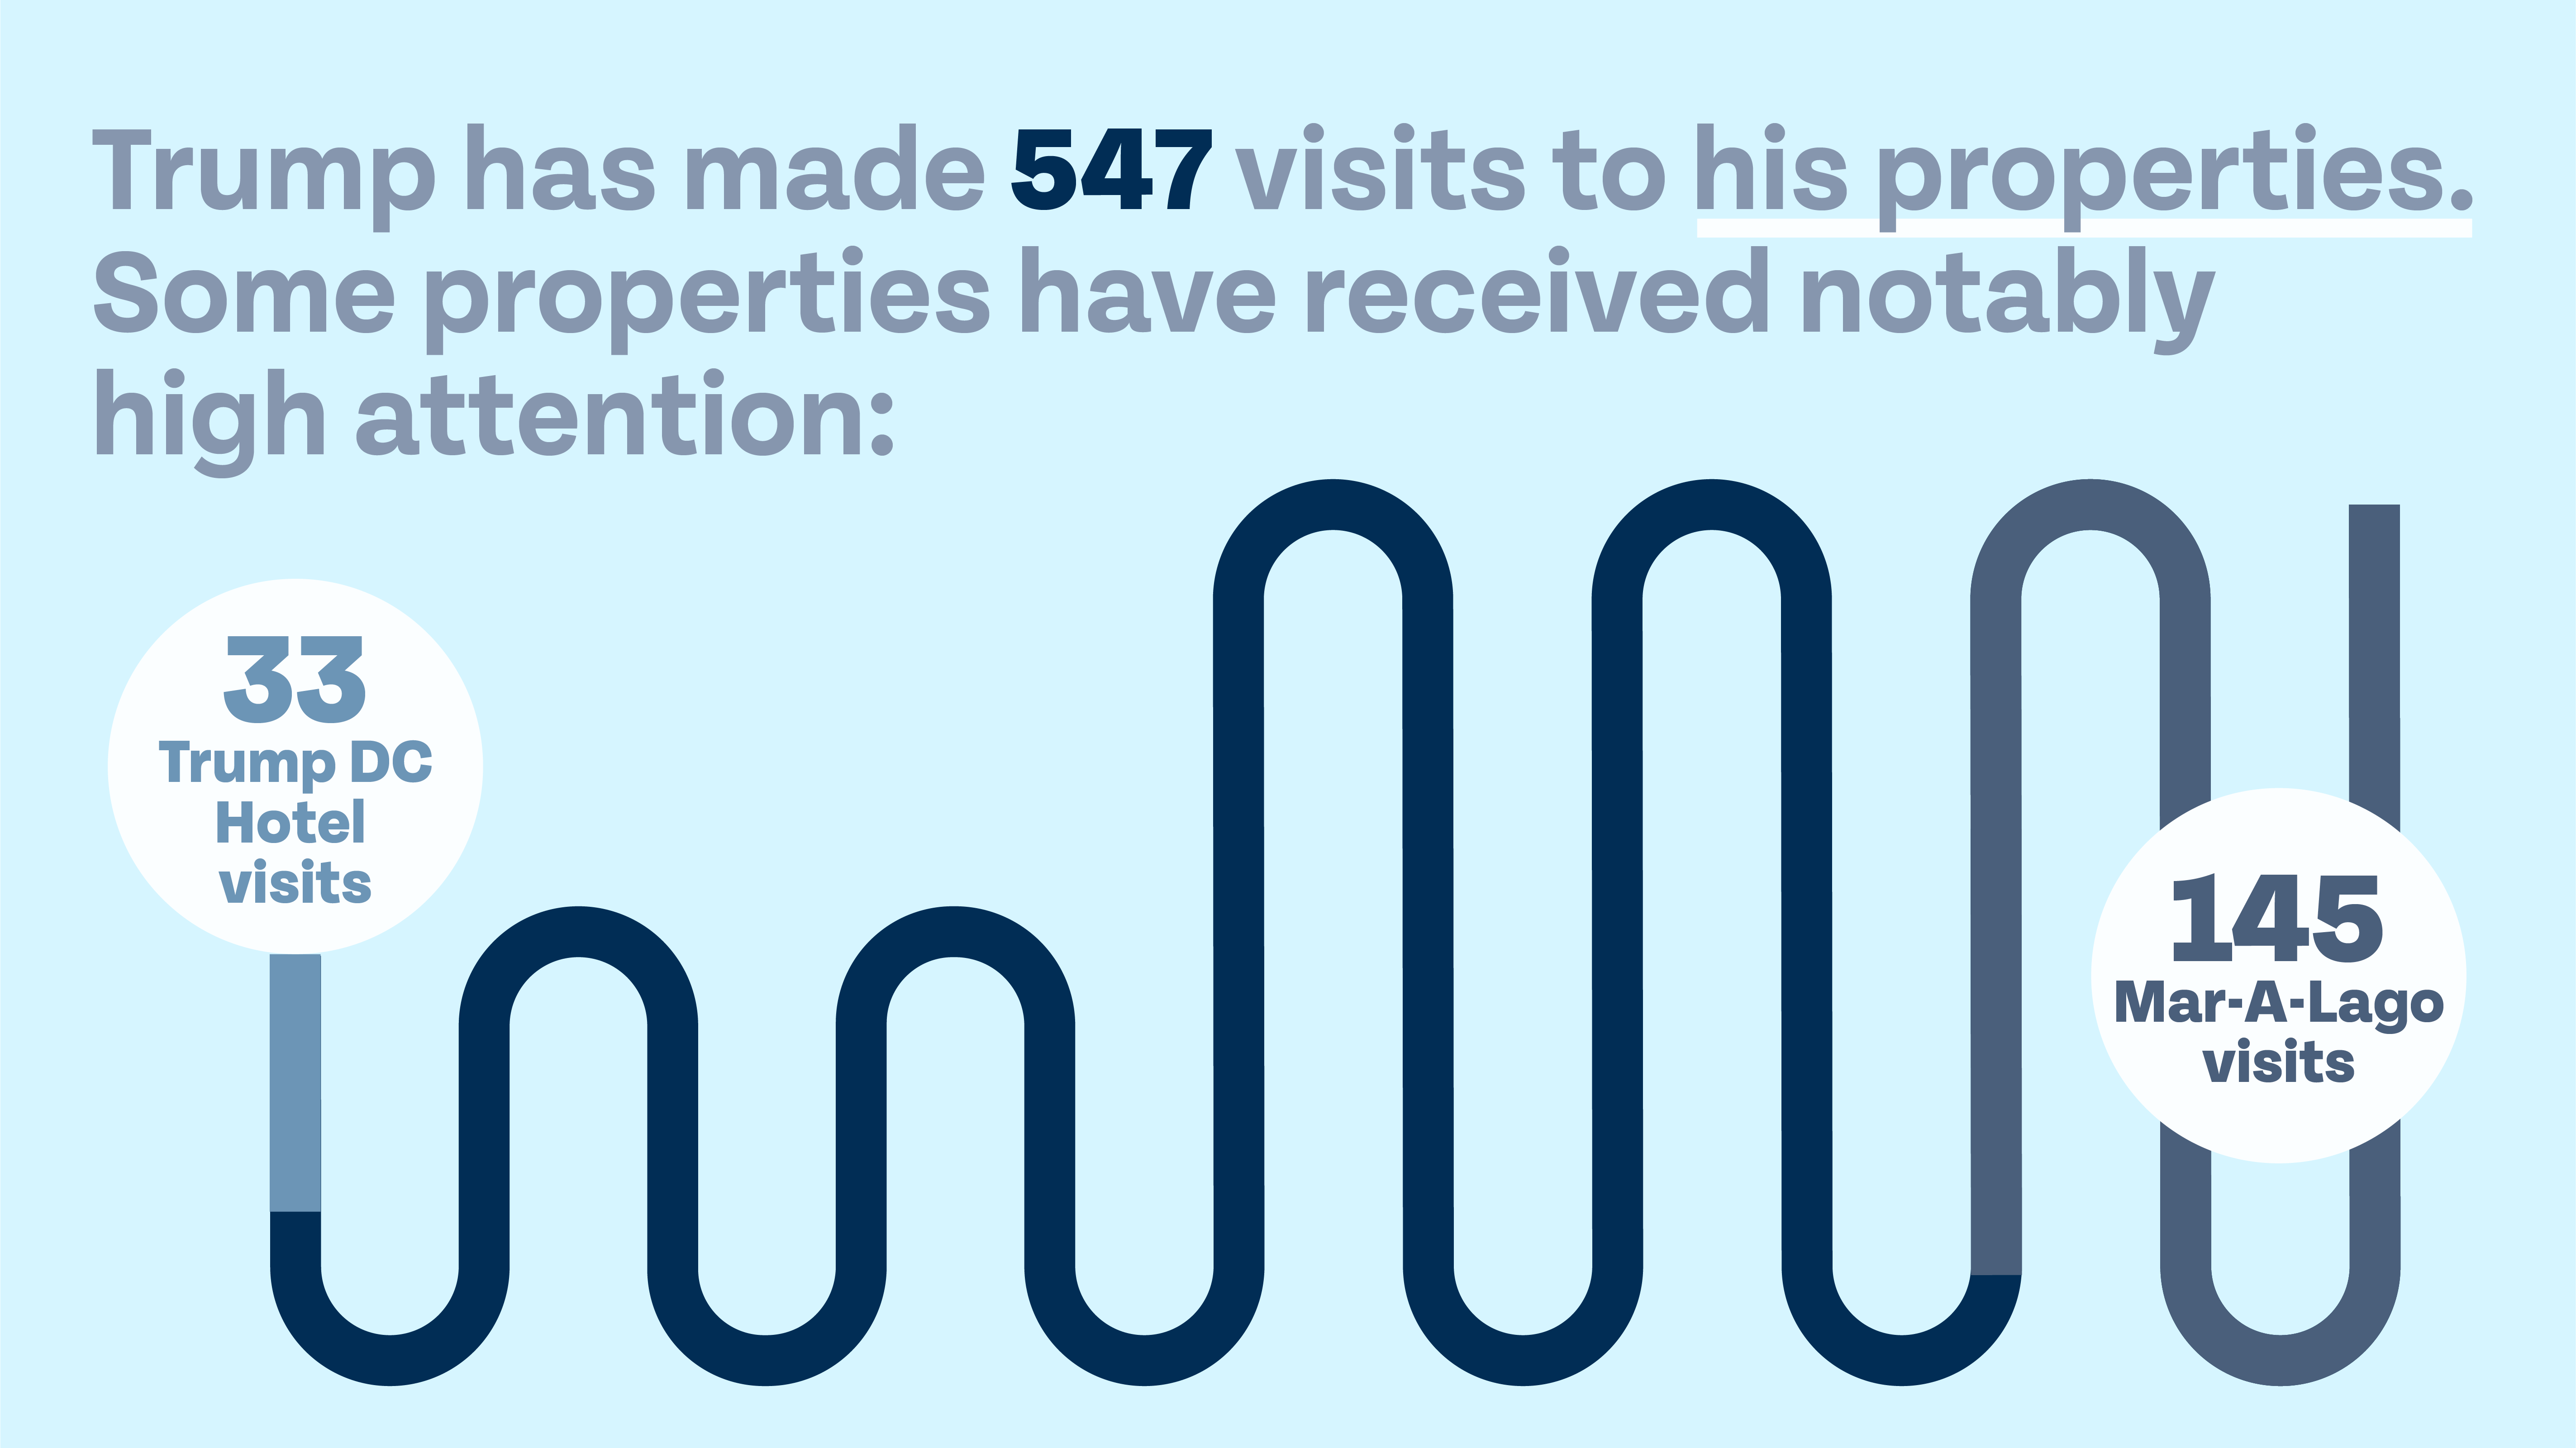 "Trump has made 547 visits to his properties. Some properties have received notably high attention: 33 Trump DC Hotel visits, 145 Mar-A-Lago visits." Light blue background with a wiggly line that proportionally marks the visits in shades of blue.